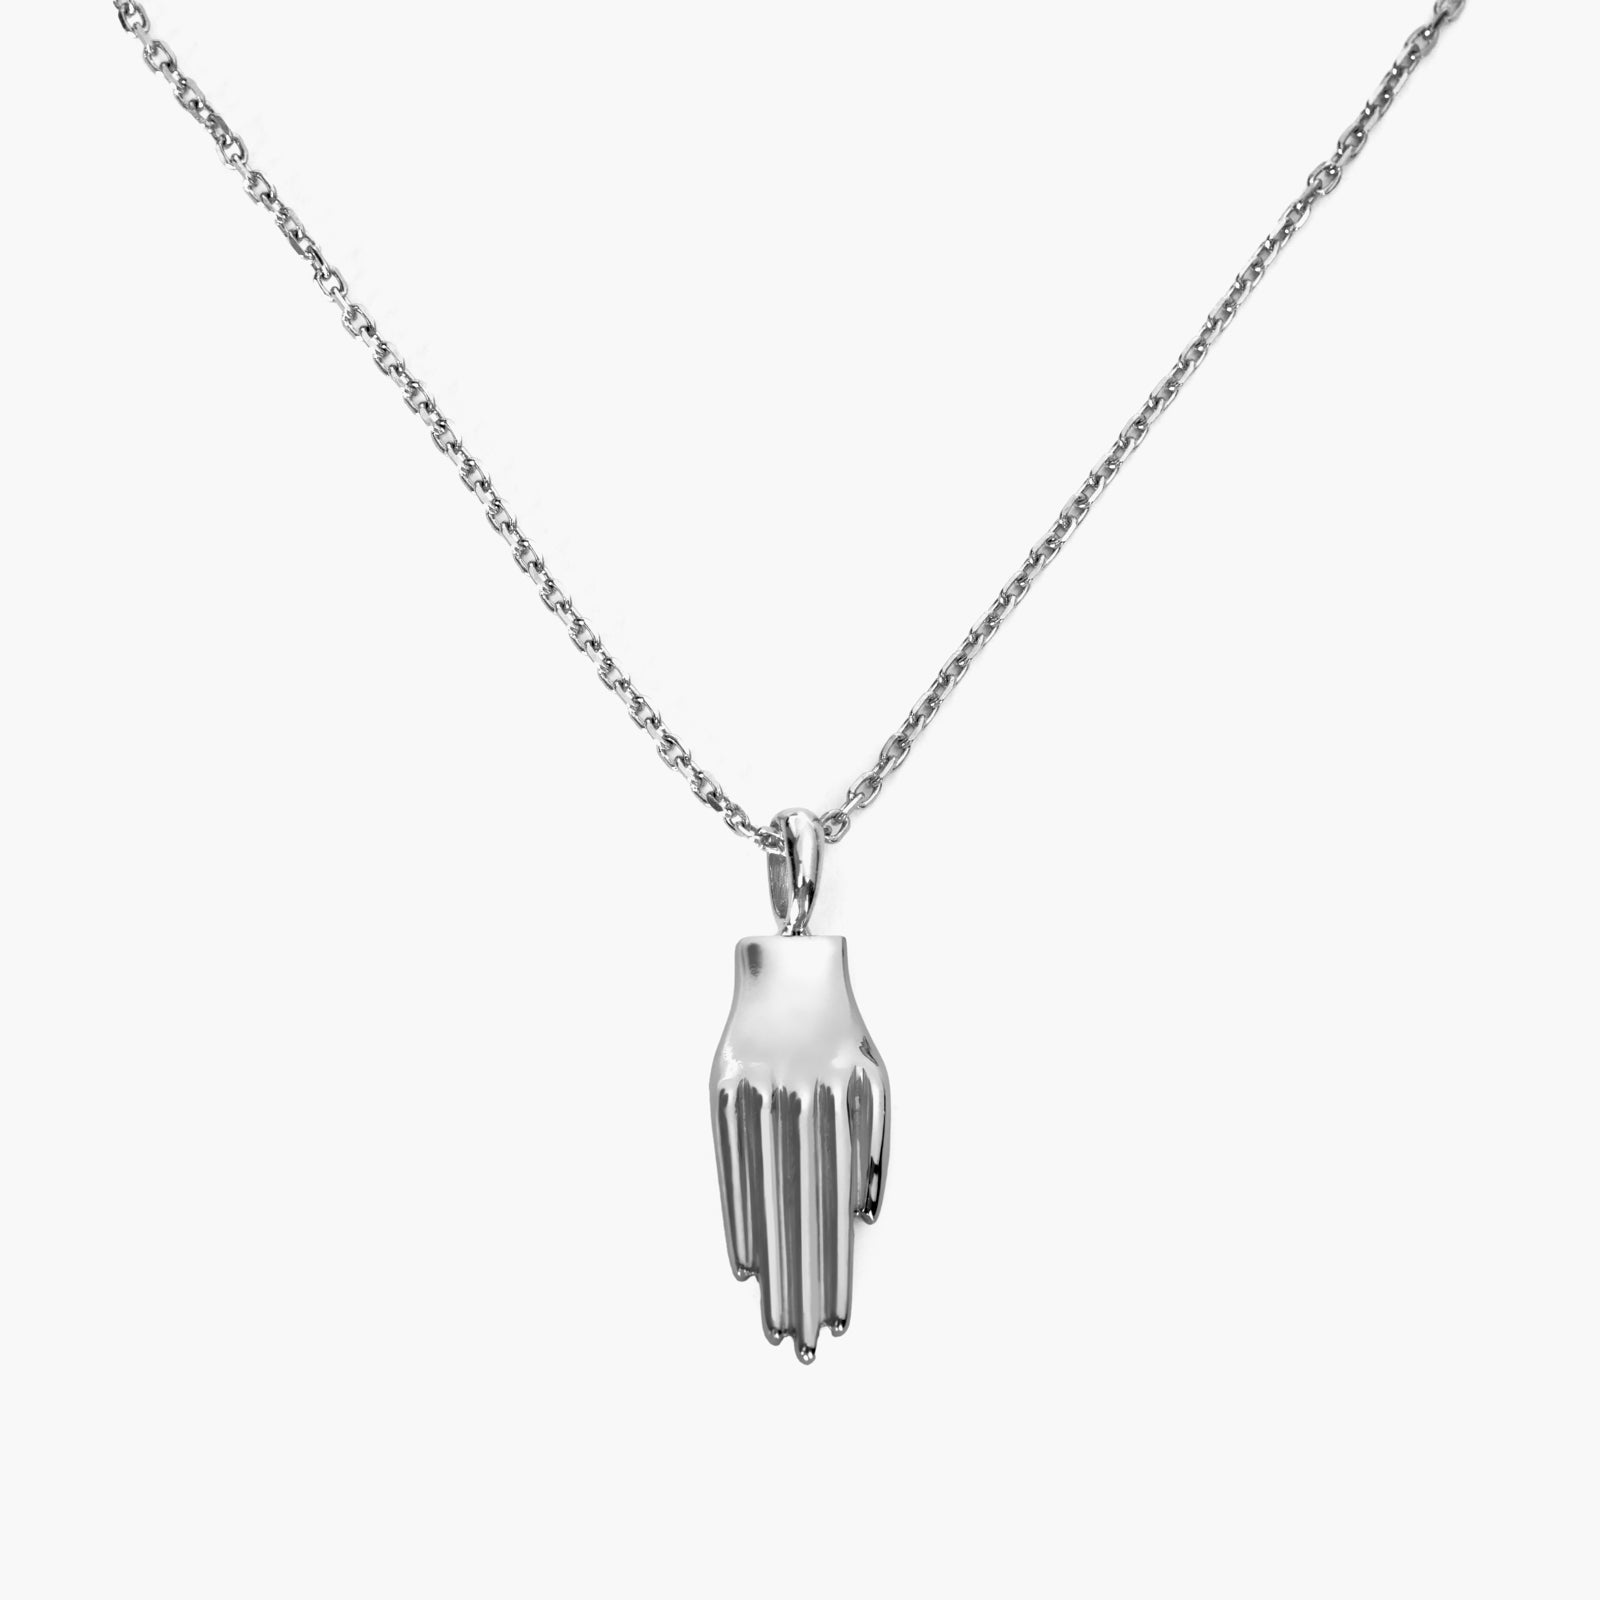 Hand Necklace Silvery